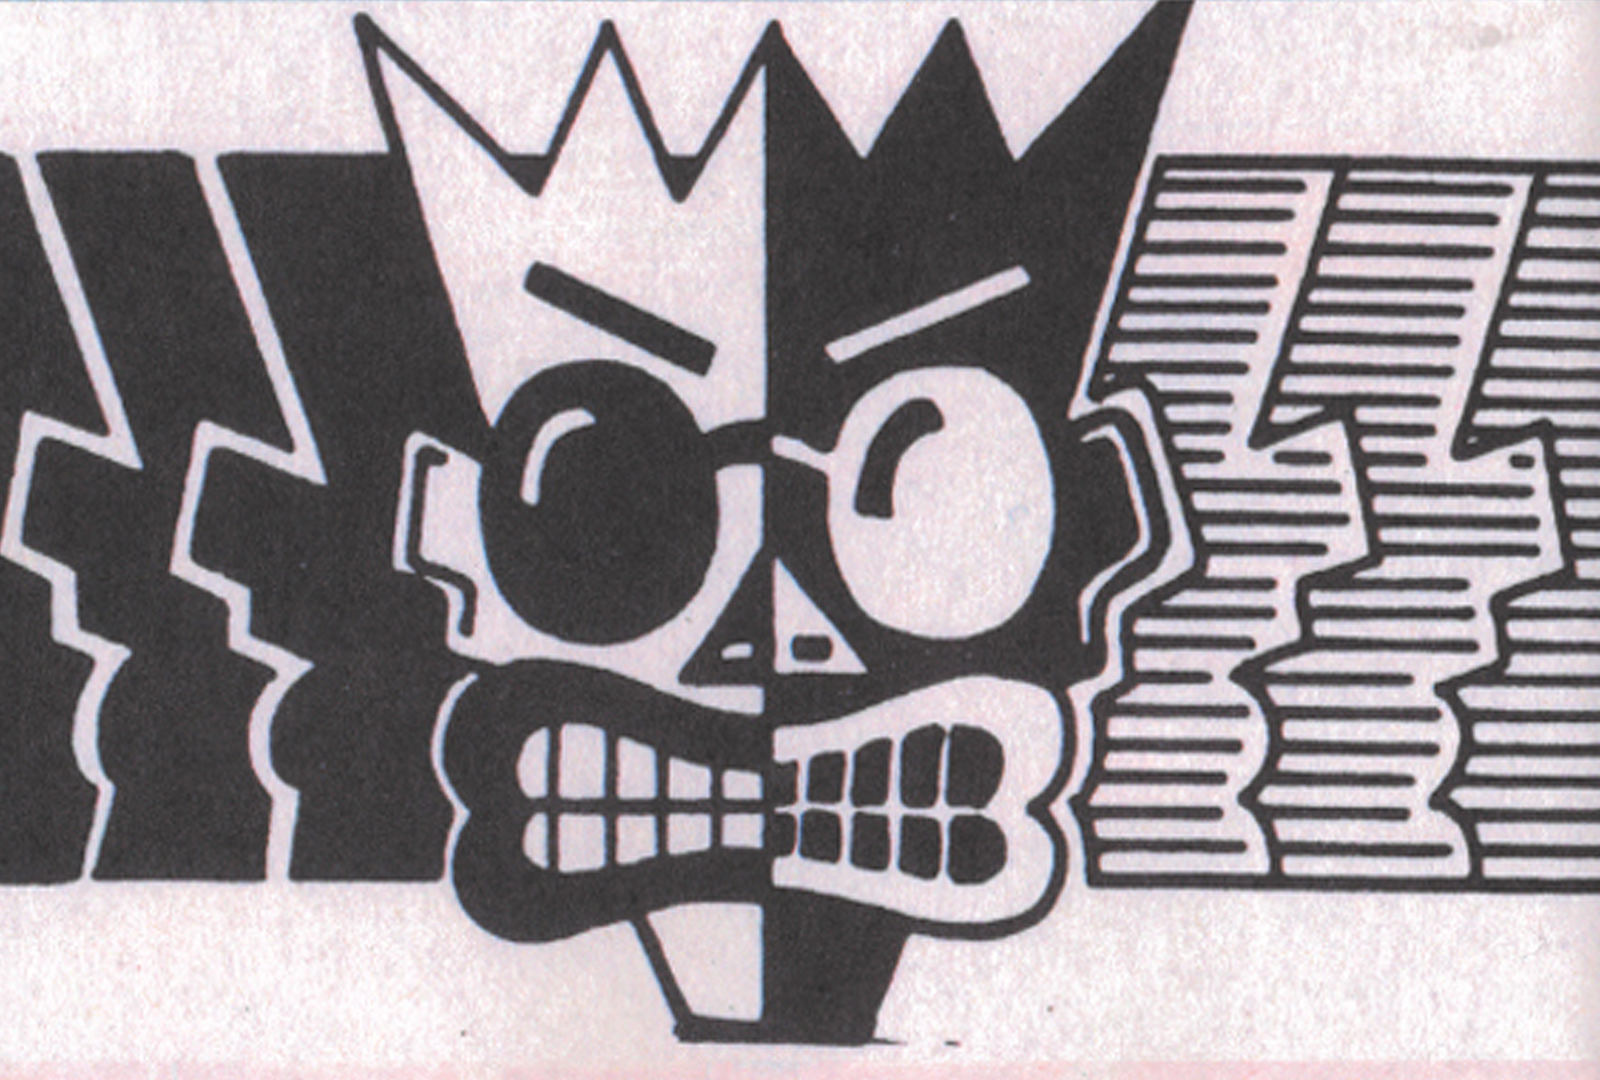 UK rave flyers from the '90s collected in new book, Ex-TRACTS